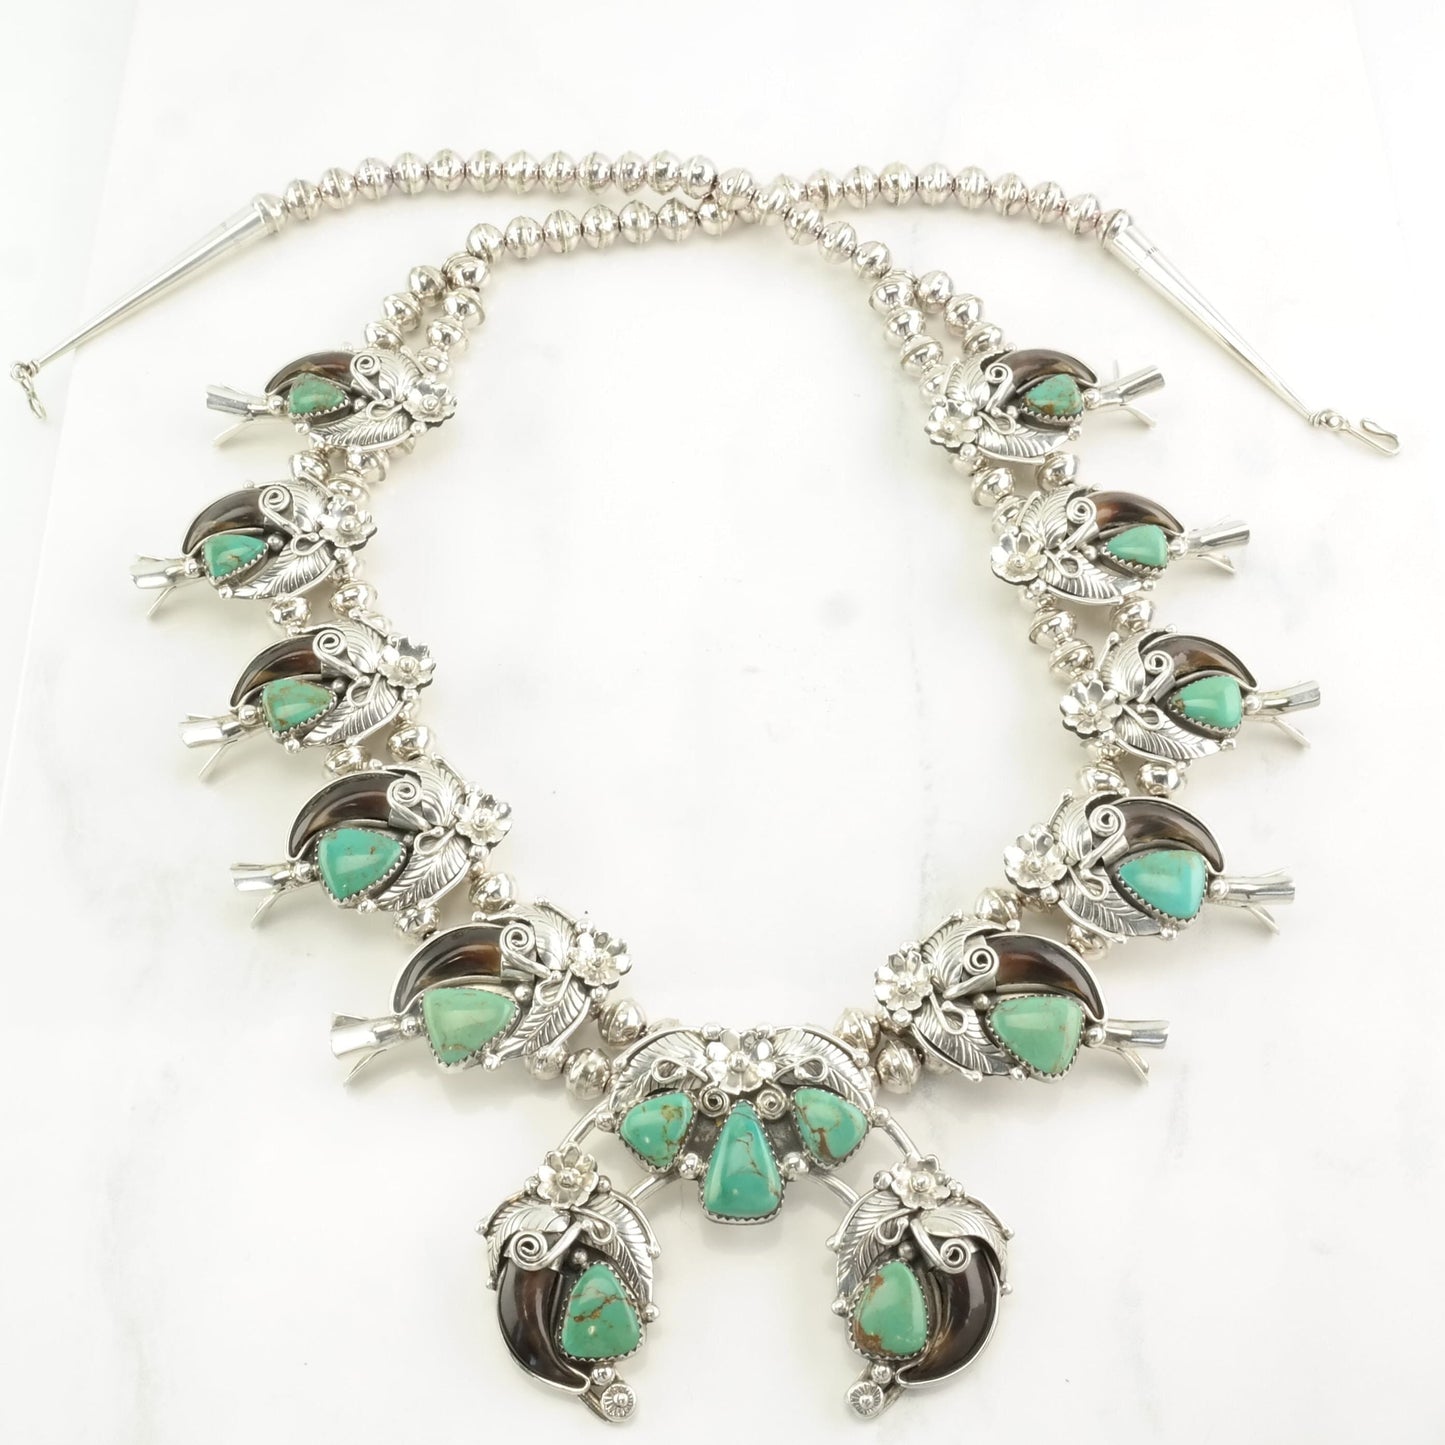 Vintage Native American Sterling Silver Green Turquoise Floral Squash Blossom Necklace